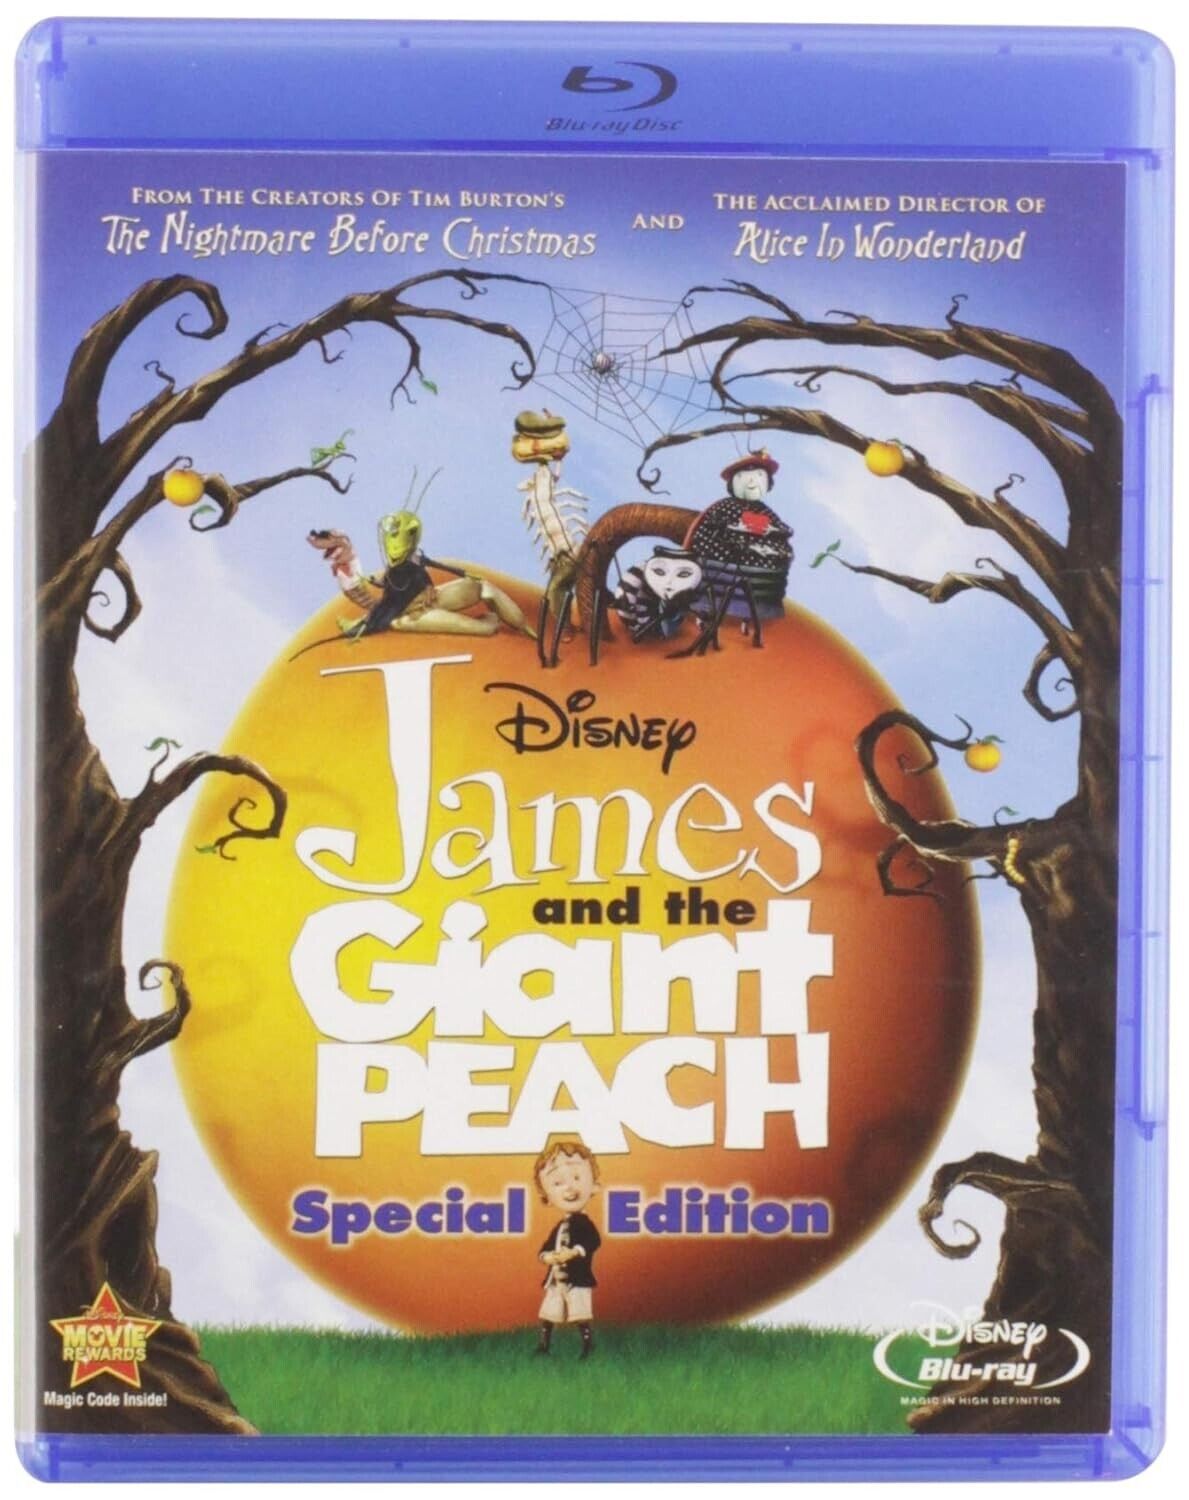 James and the Giant Peach (Two-Disc Special Edition Blu-ray/DVD Combo)